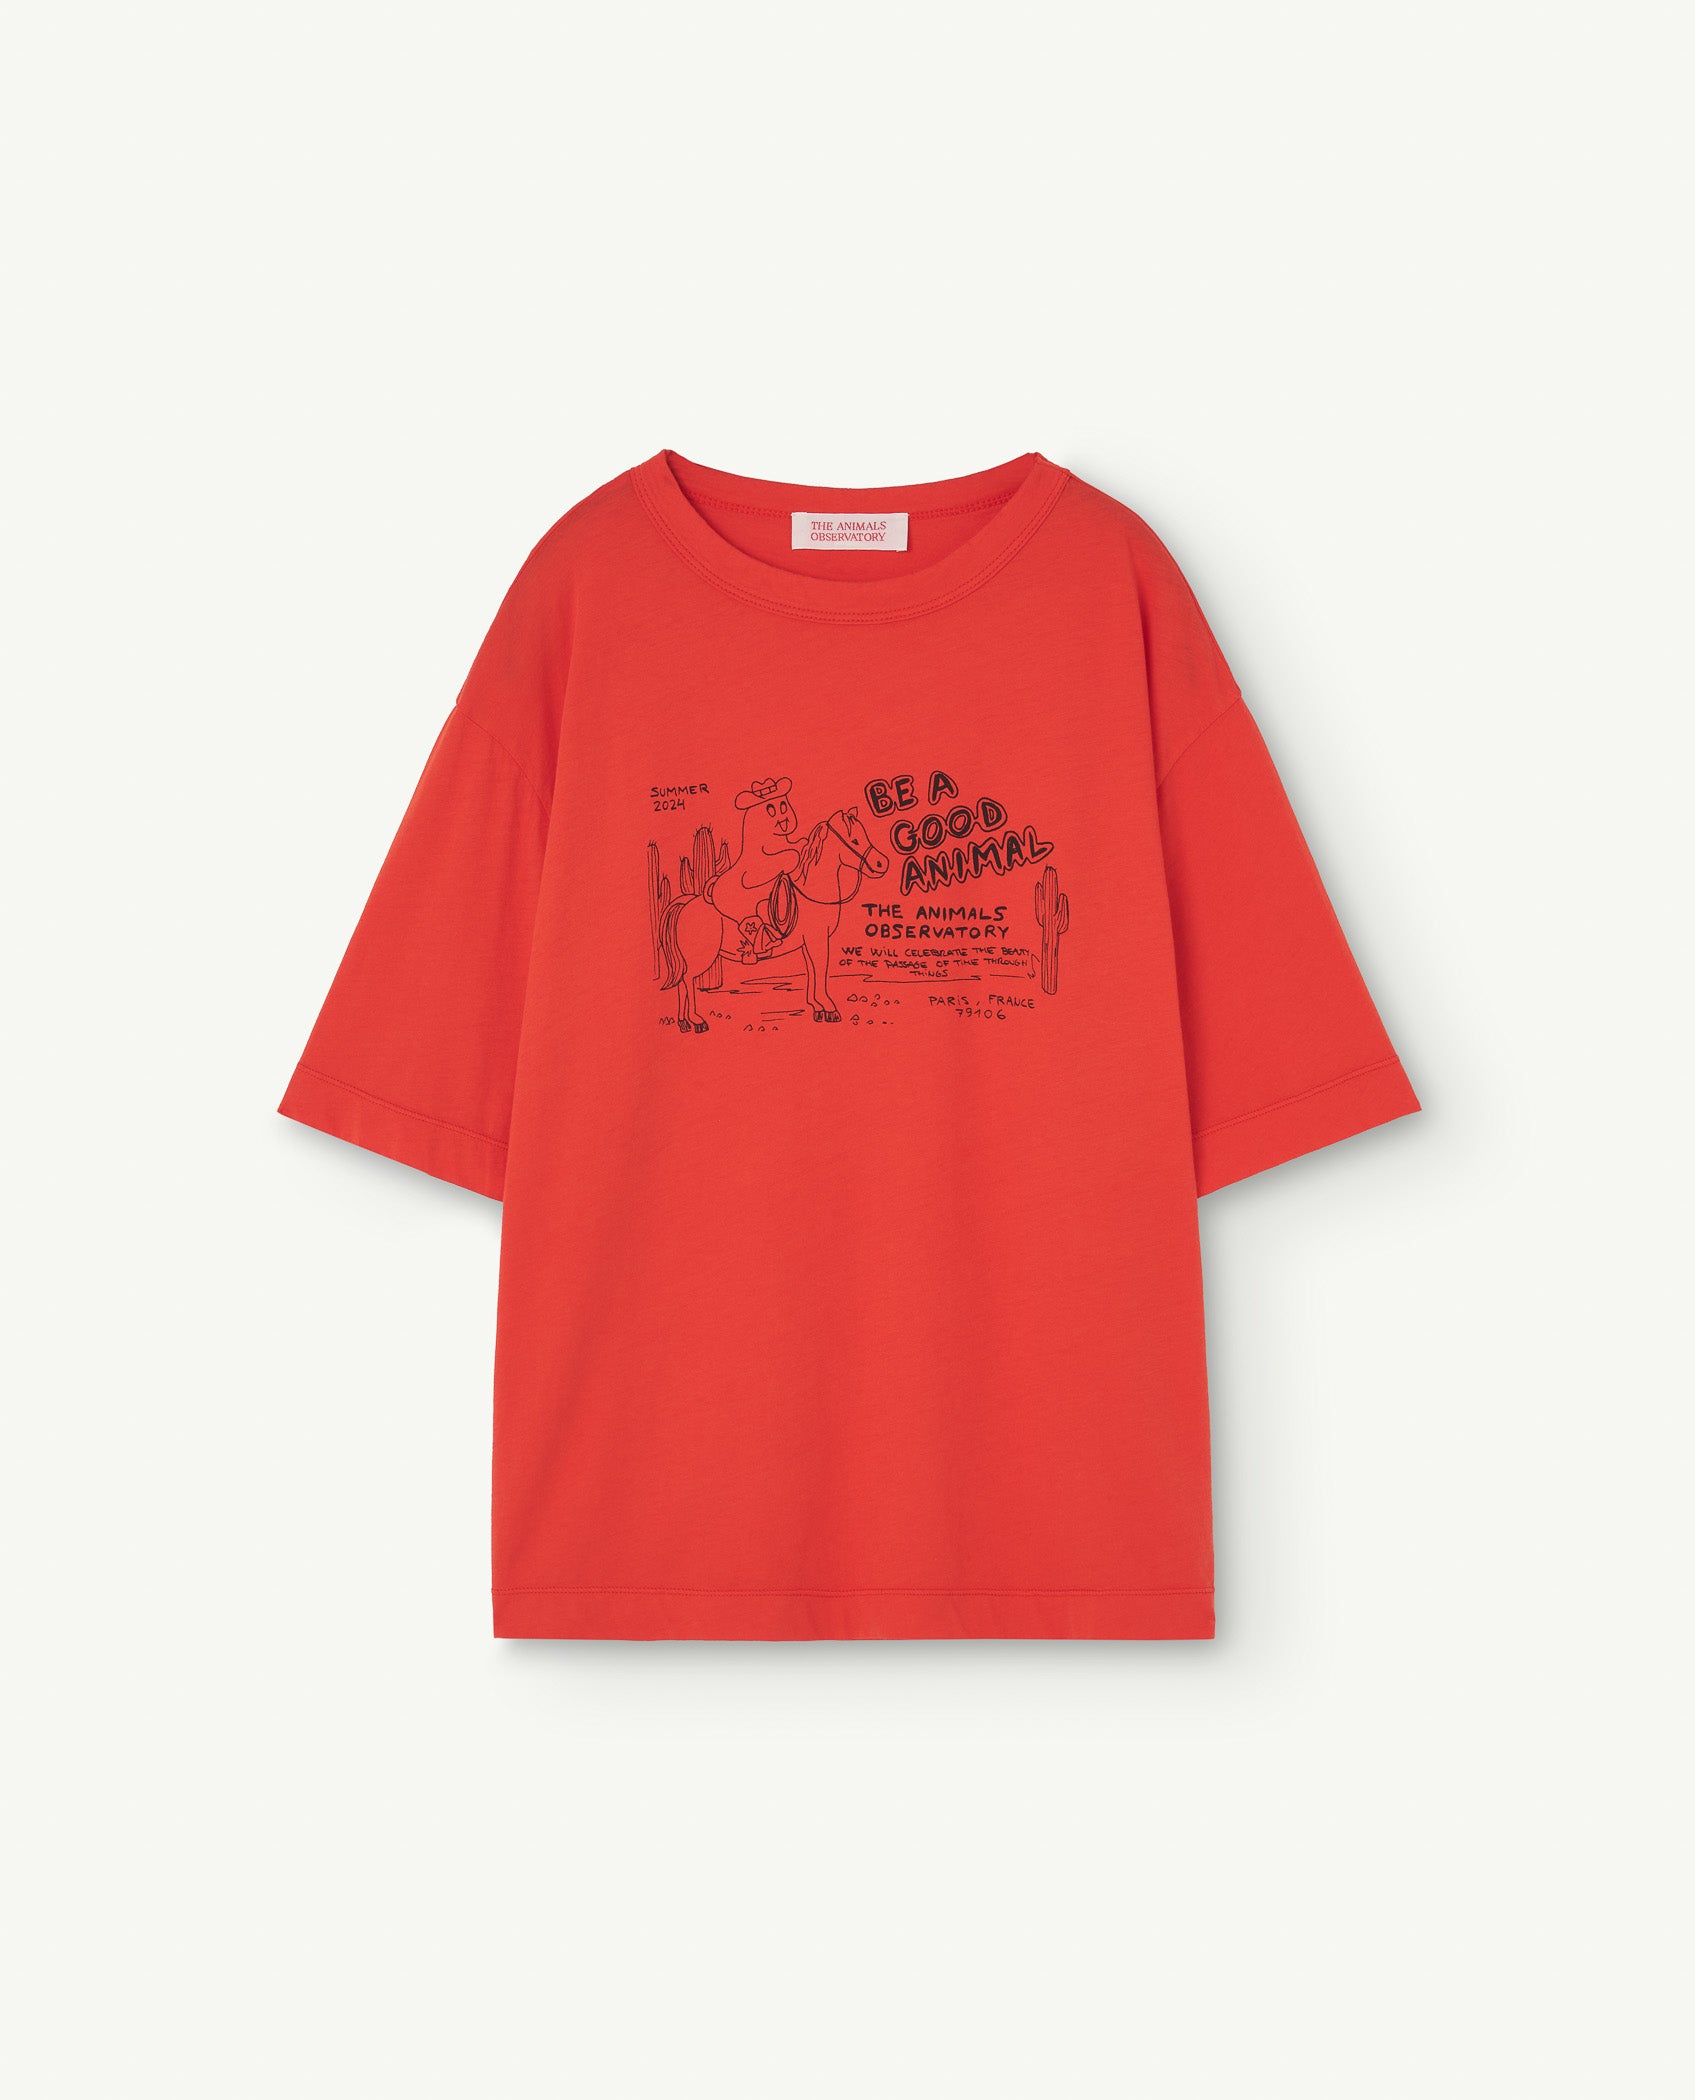 NEW The Animals Observatory | The Westen Rooster T shirt- Red